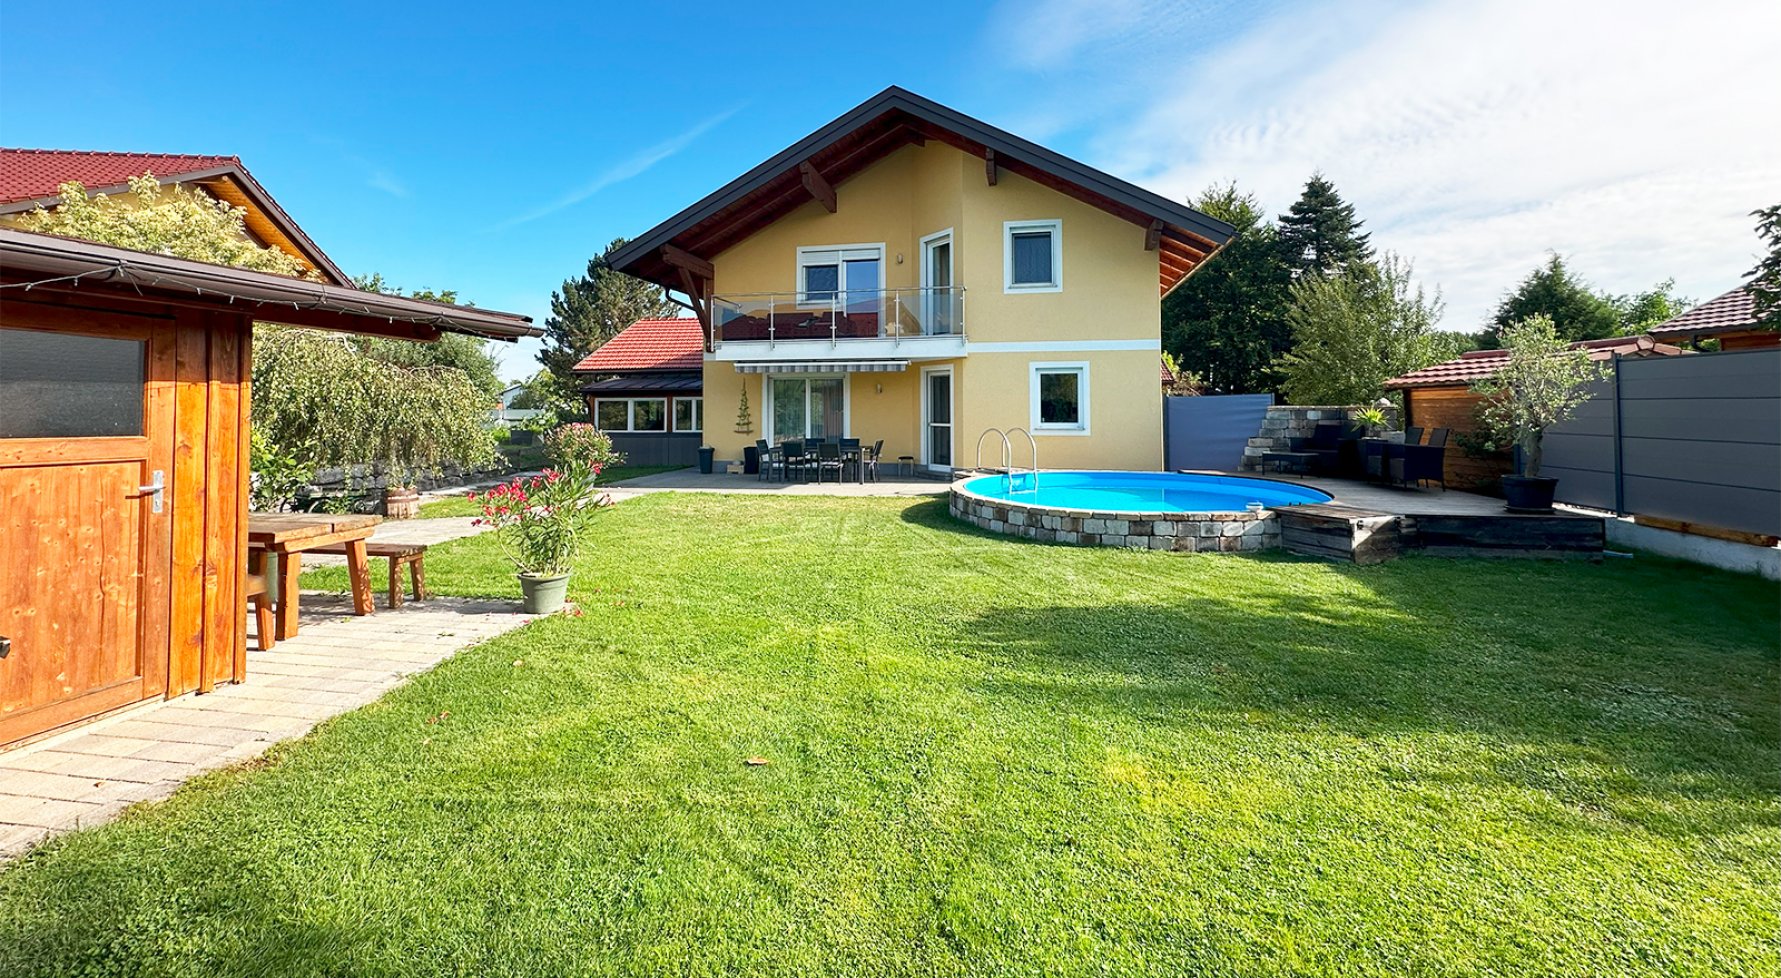 Property in 5221 Lochen am See: LOCHEN AM SEE! Family home with pool and large plot! - picture 1